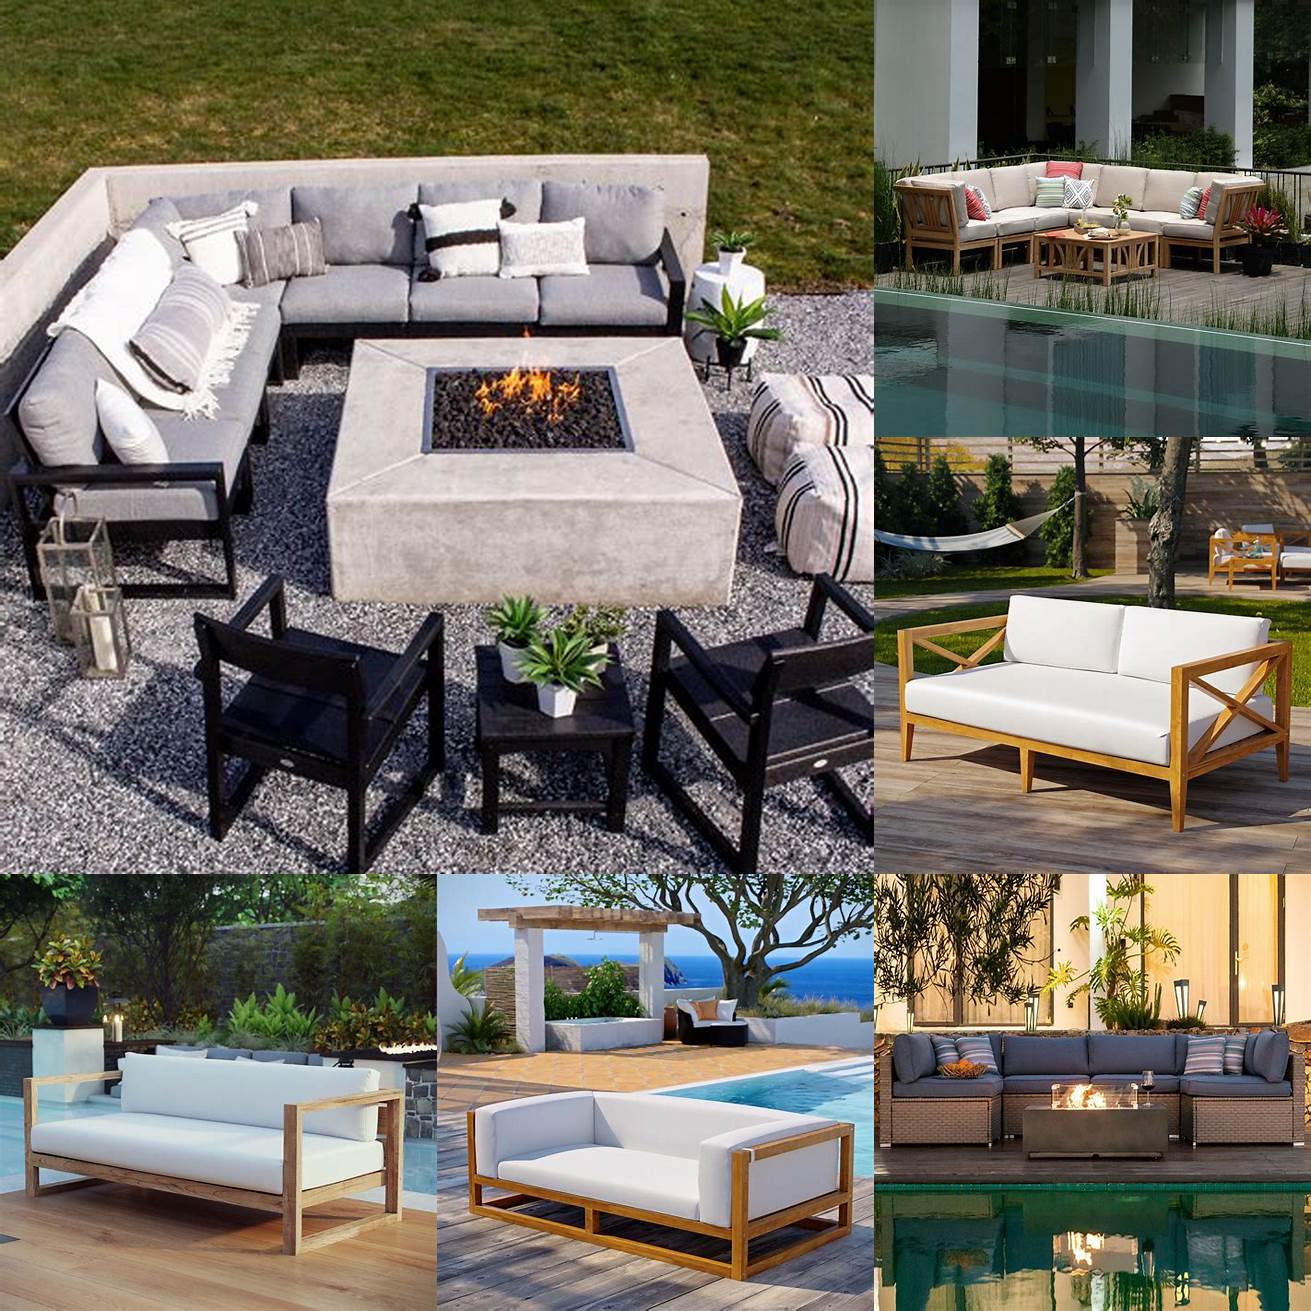 Teak Outdoor Sofa by a Fire Pit